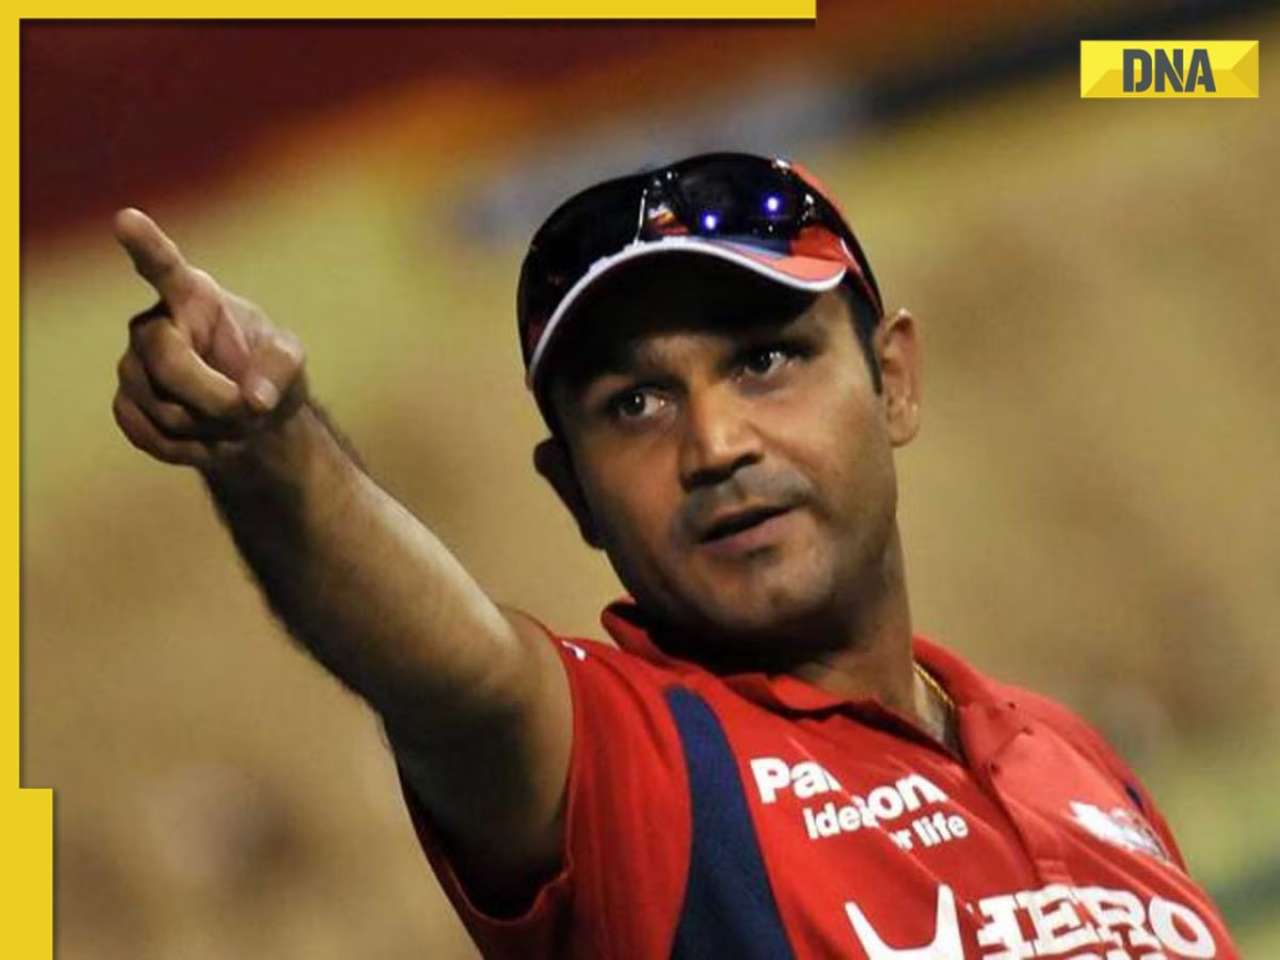 'Won't find a place in my team': Virender Sehwag slams legendary India player for his comments on T20 cricket